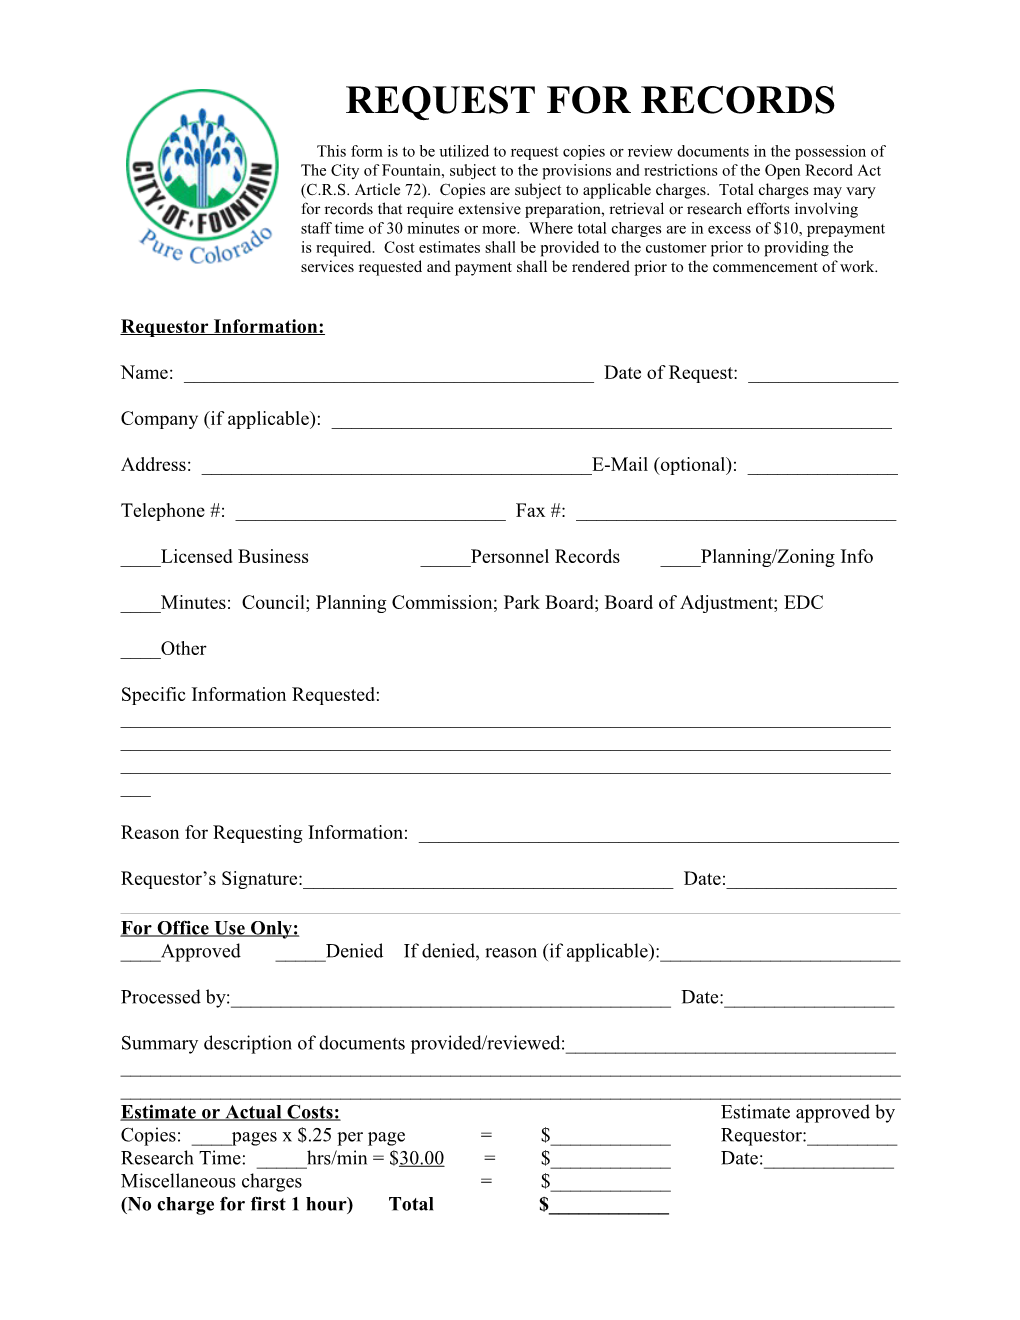 This Form Is to Be Utilized to Request Copies Or Review Documents in the Possession Of